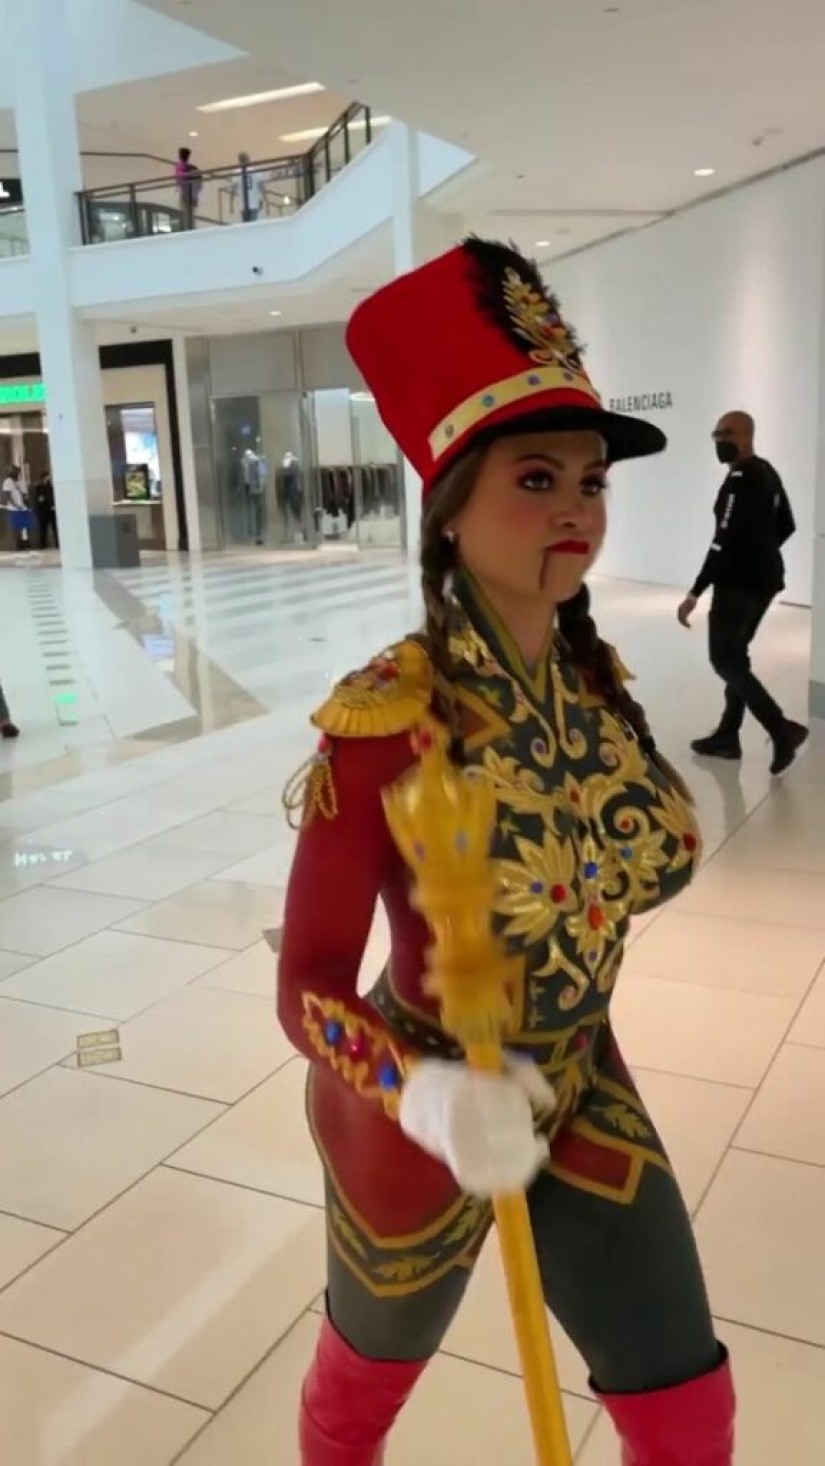 Just a Nutcracker: Playboy model kicked out of the mall for indecent appearance